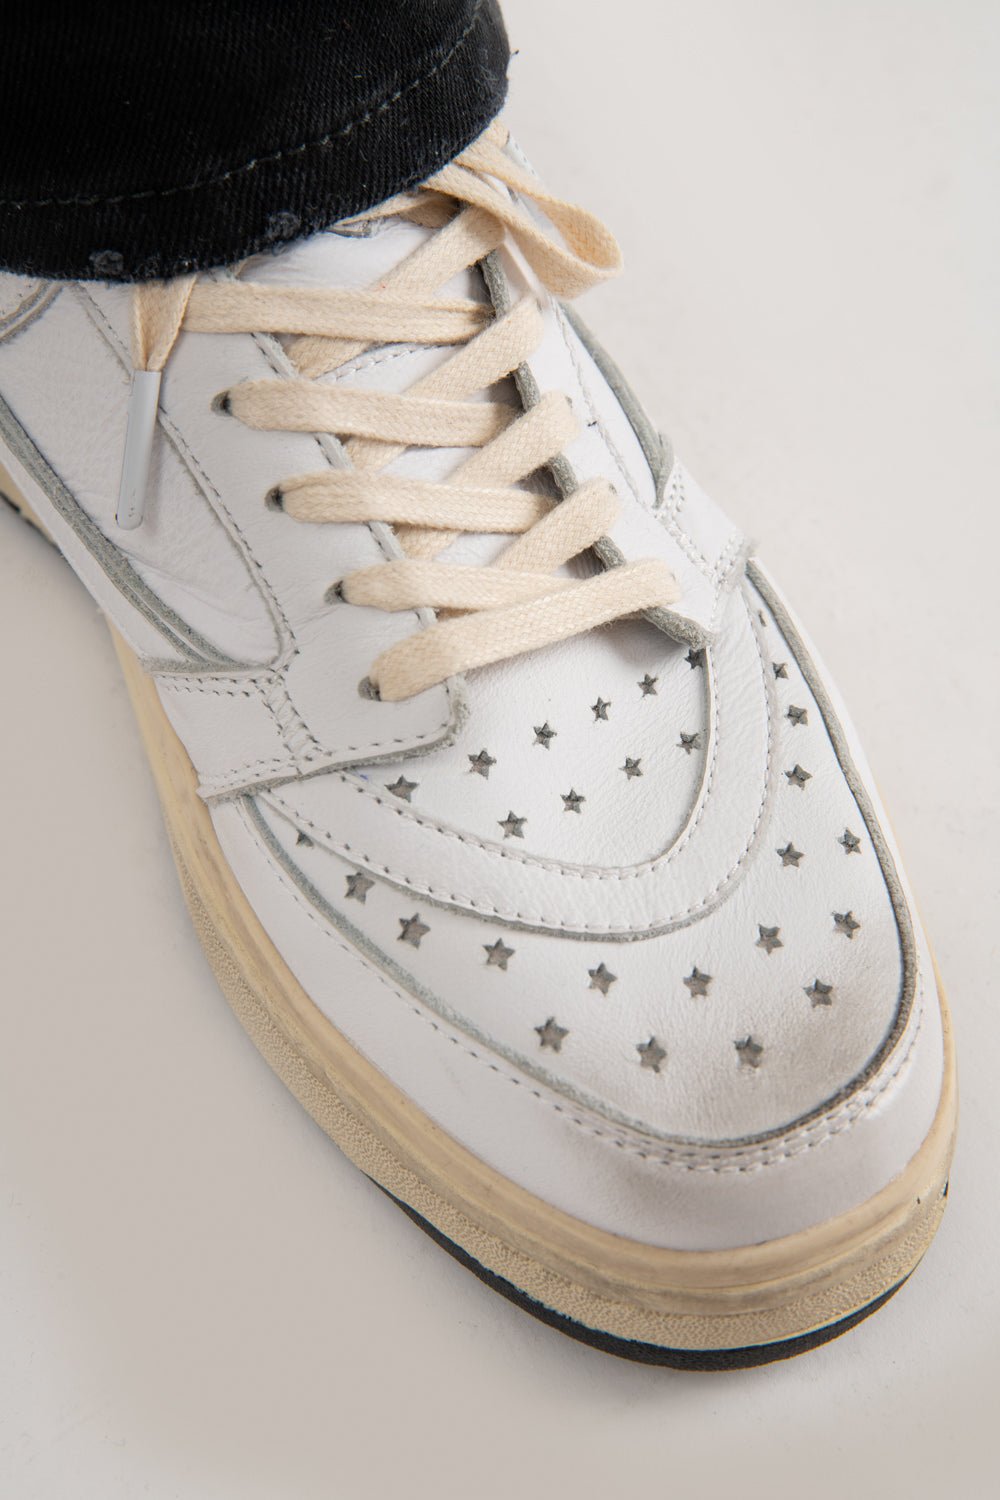 STARLIGHT LOW SHIELD MAN Starlight Low Shield Man Sneakers, back pull loop with logo detail, rubber sole, perforated toe and front lace-up closure, 100% leather HTC LOS ANGELES